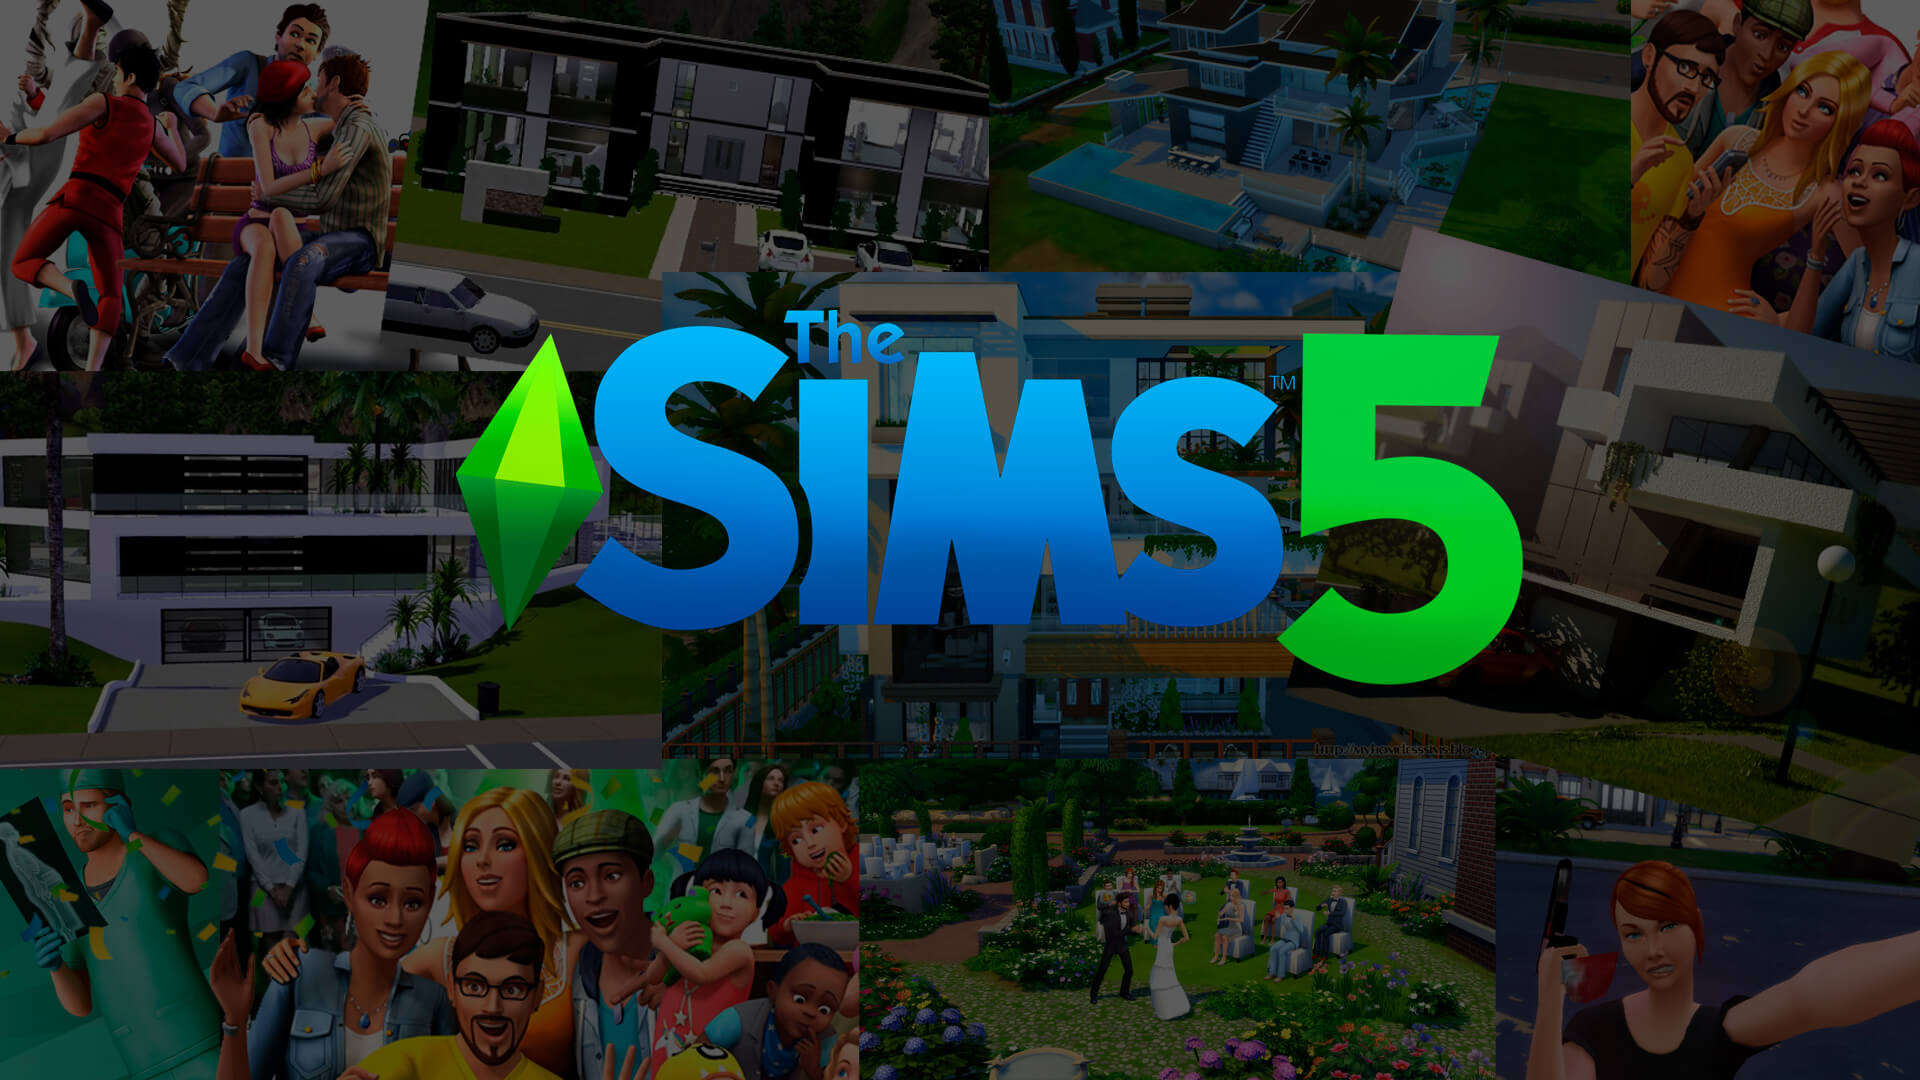 The Sims 5 2020 Release Date Delayed as more 'Sims 4' Expansion Packs ...